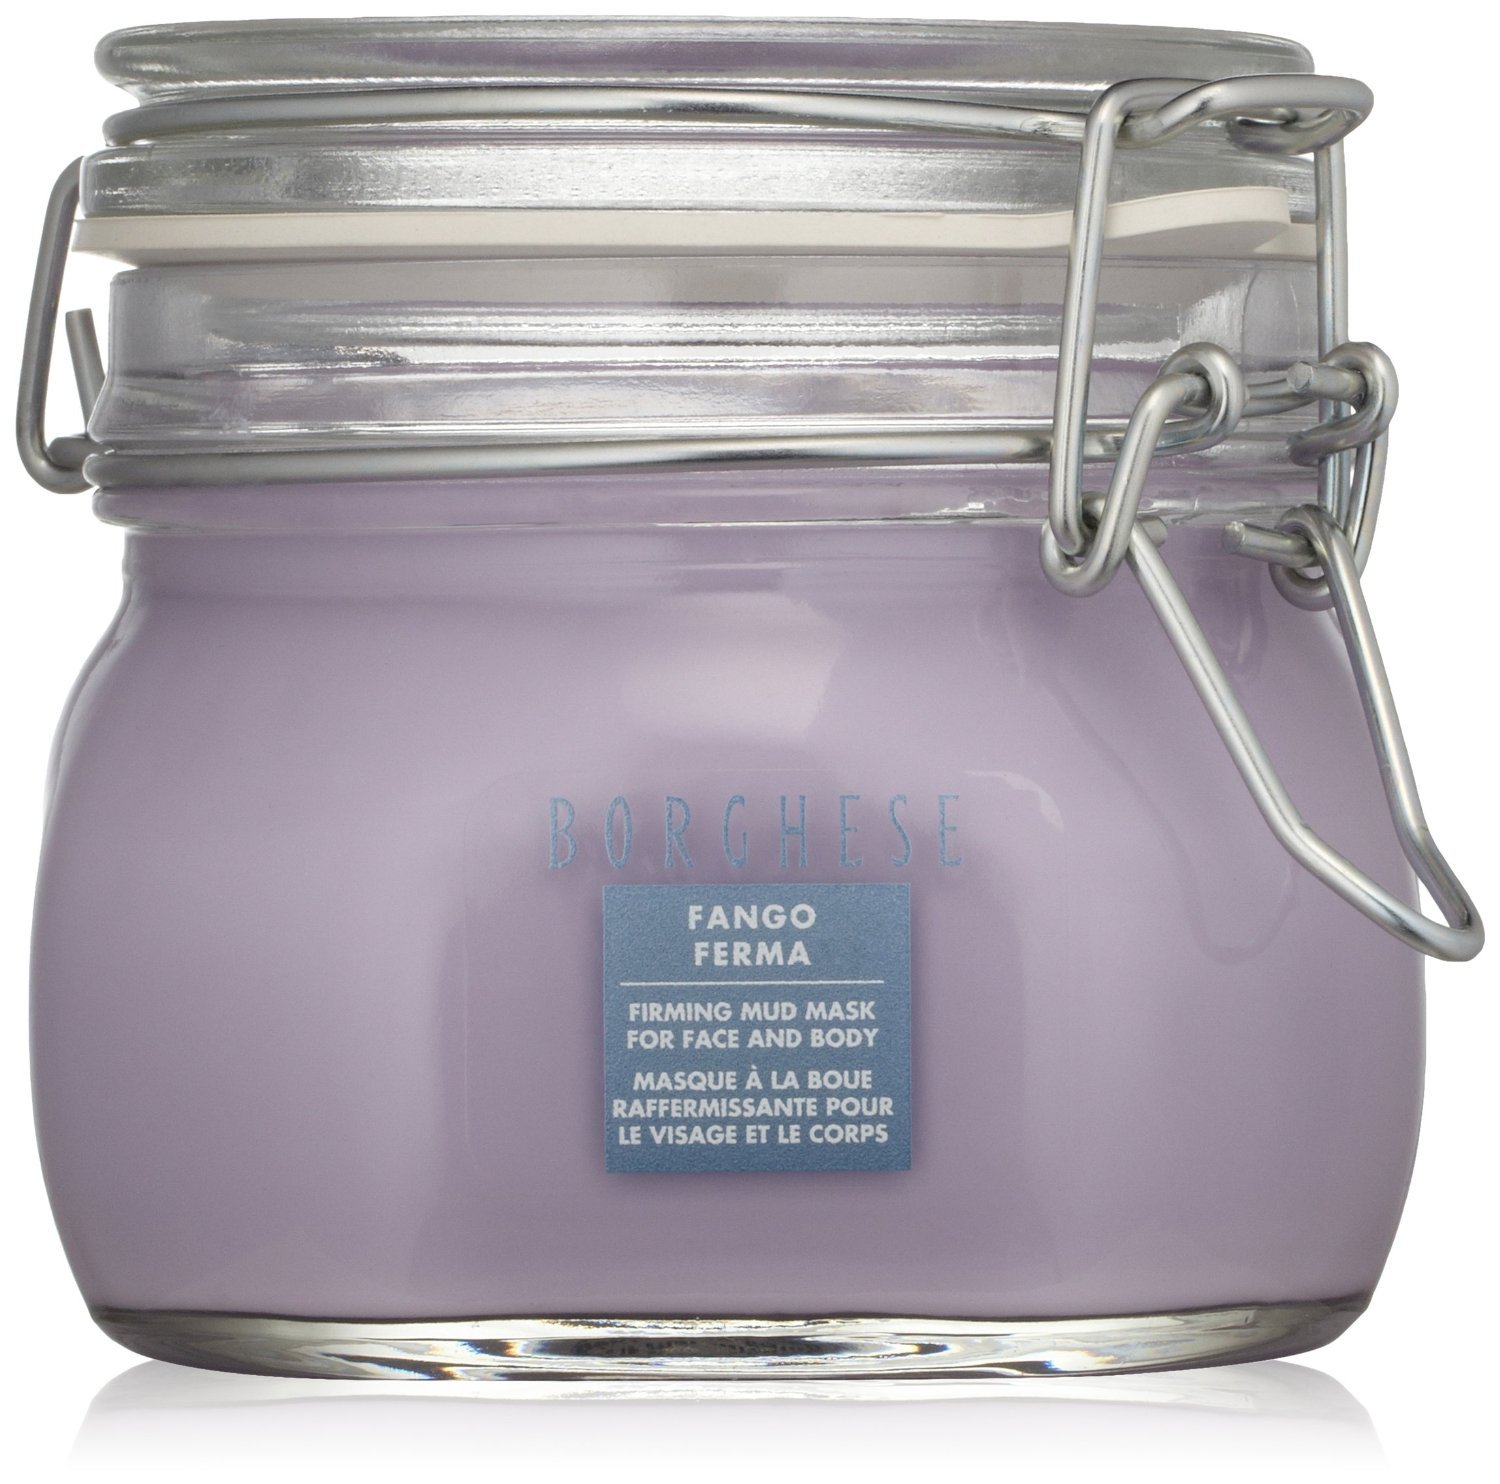 Borghese Fango Ferma Firming Mud Mask for Face and Body, 17.6 oz - $44.75